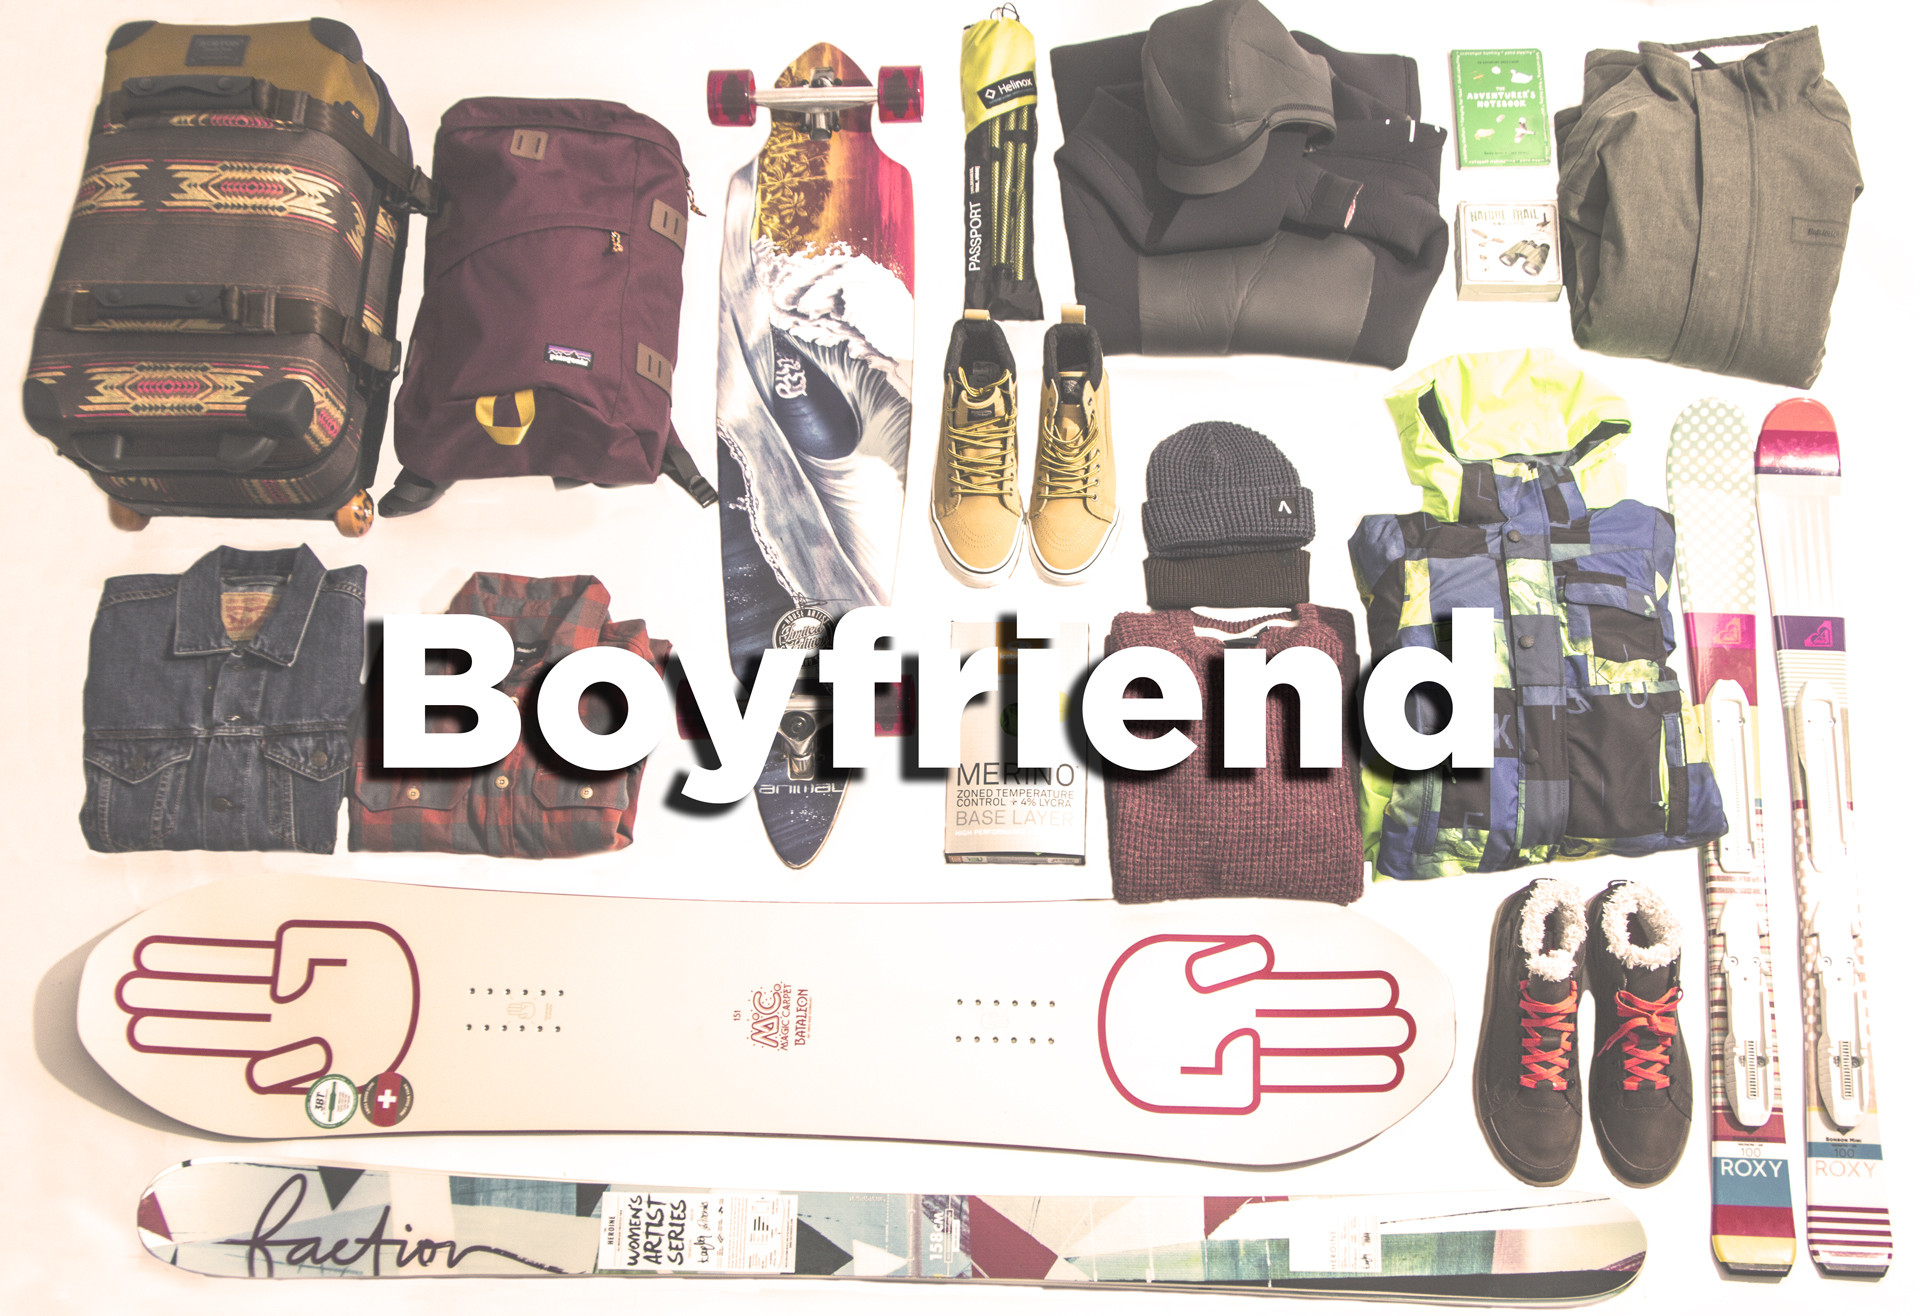 Gift Ideas For A Boyfriend
 Christmas Gift Ideas For A Boyfriend 15 Great Gifts